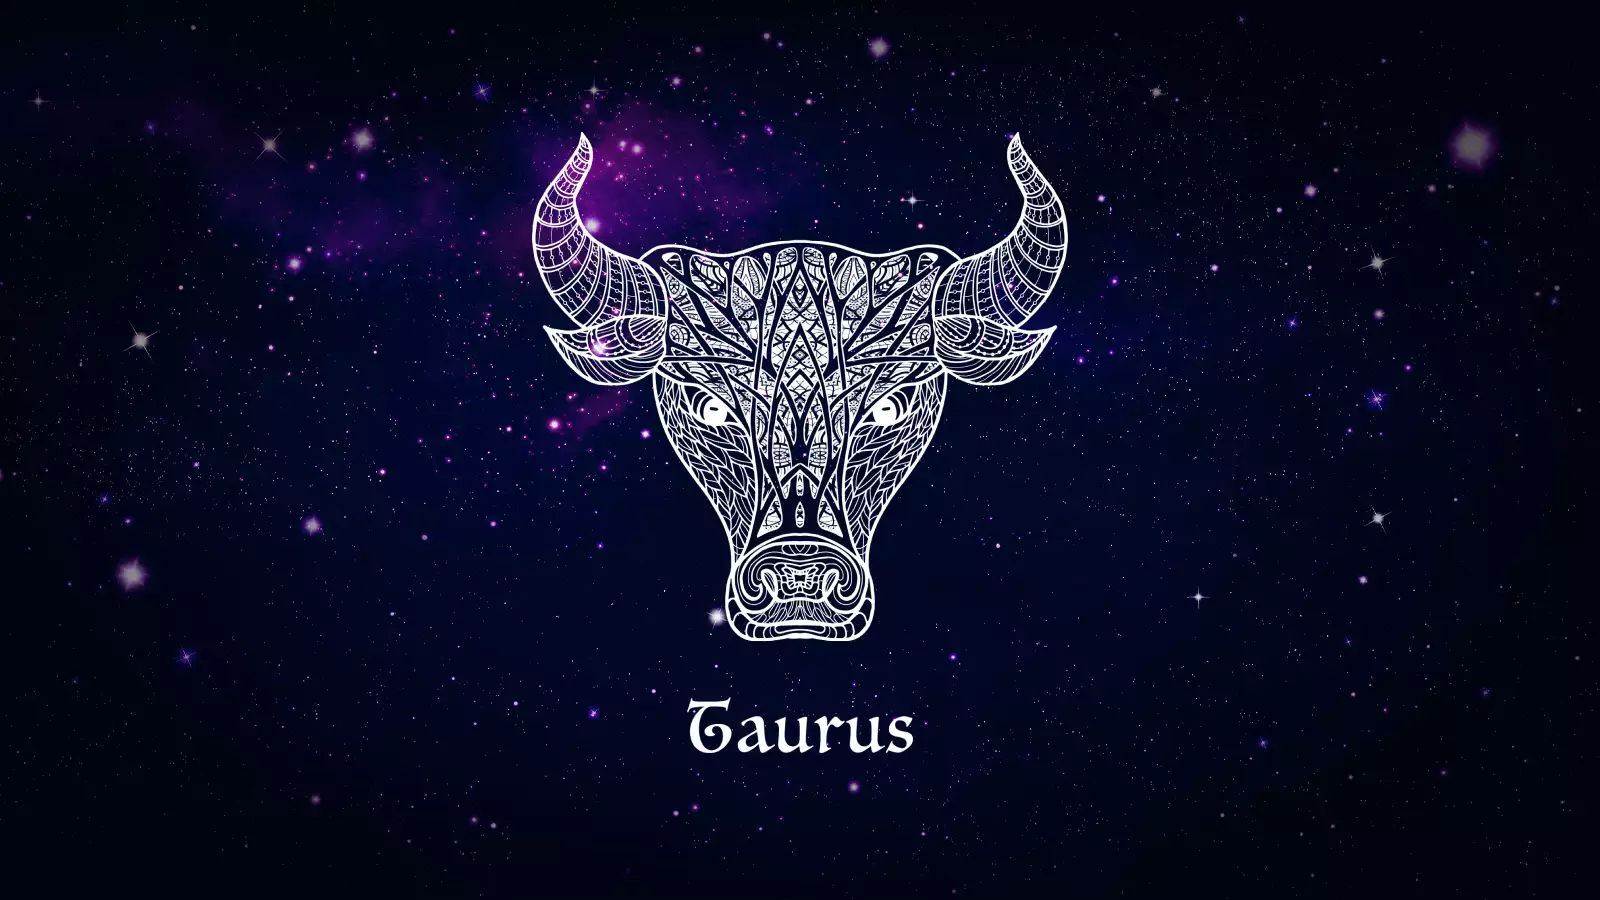 14 Enigmatic Facts About Taurus - Facts.net